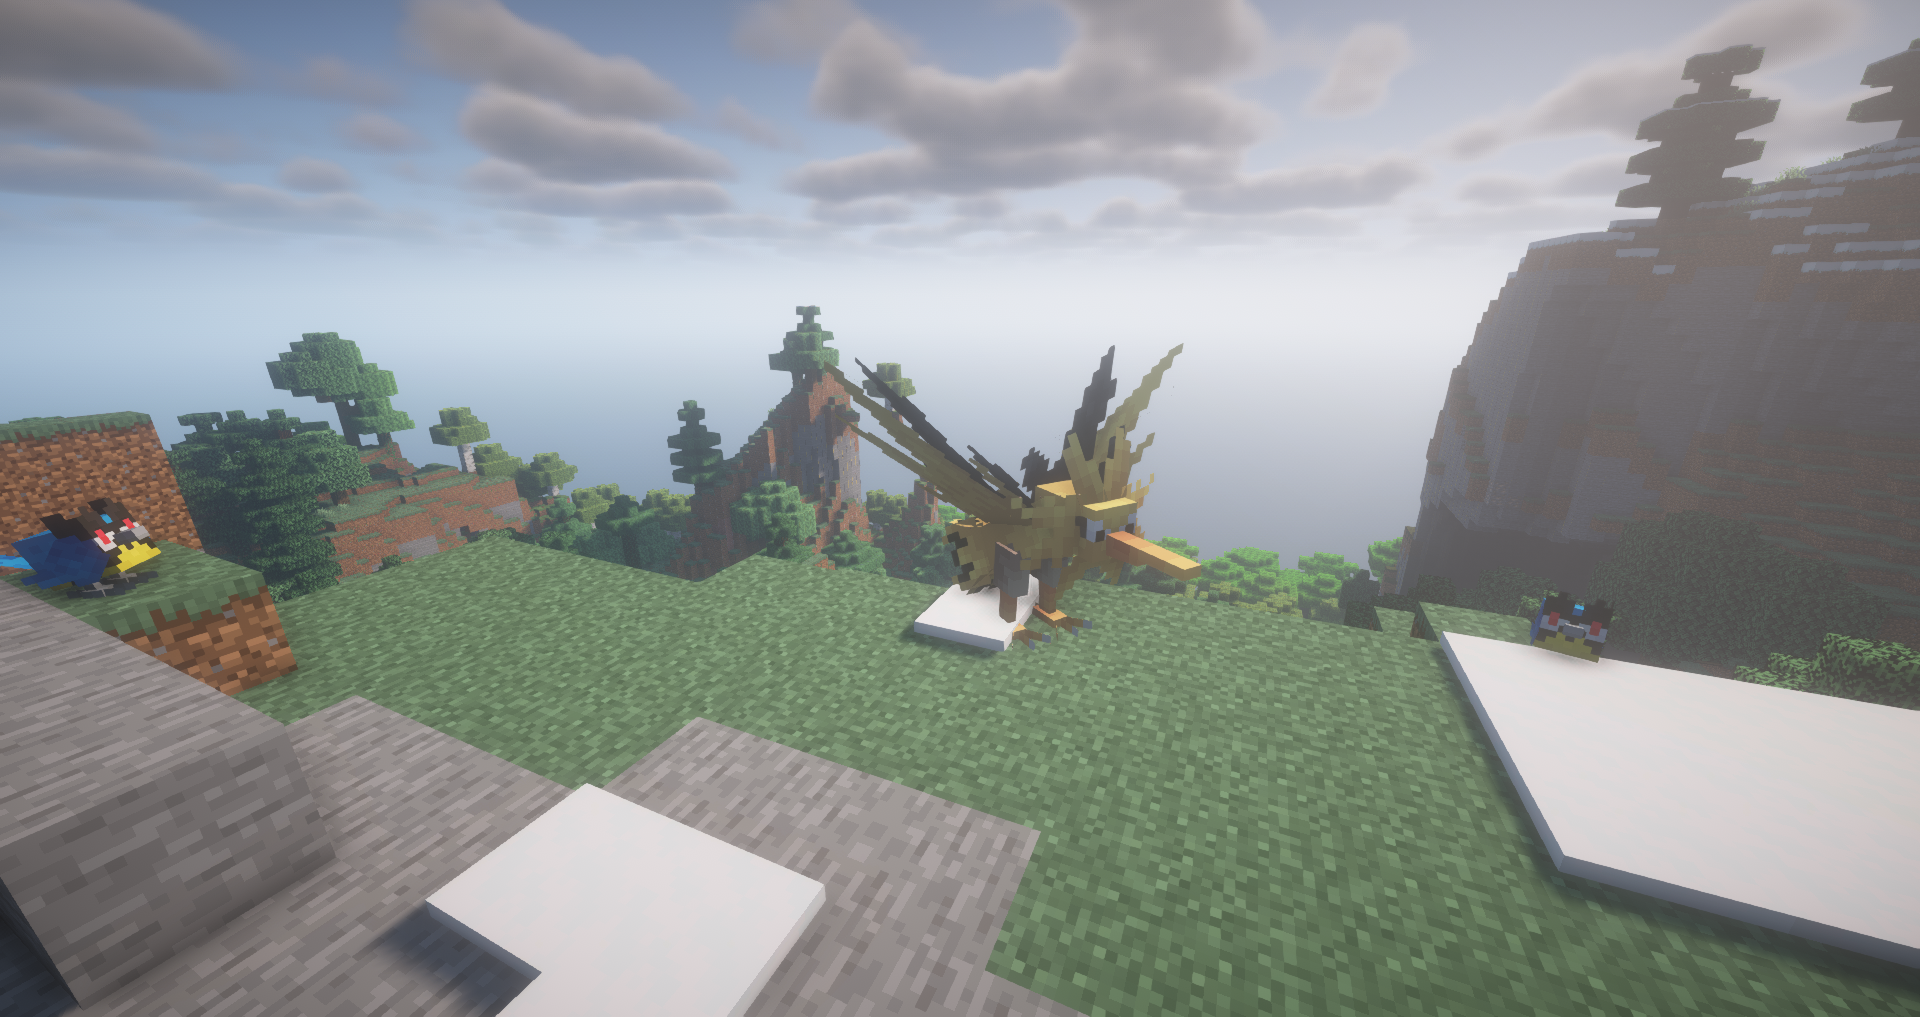 Zapdos and the hills